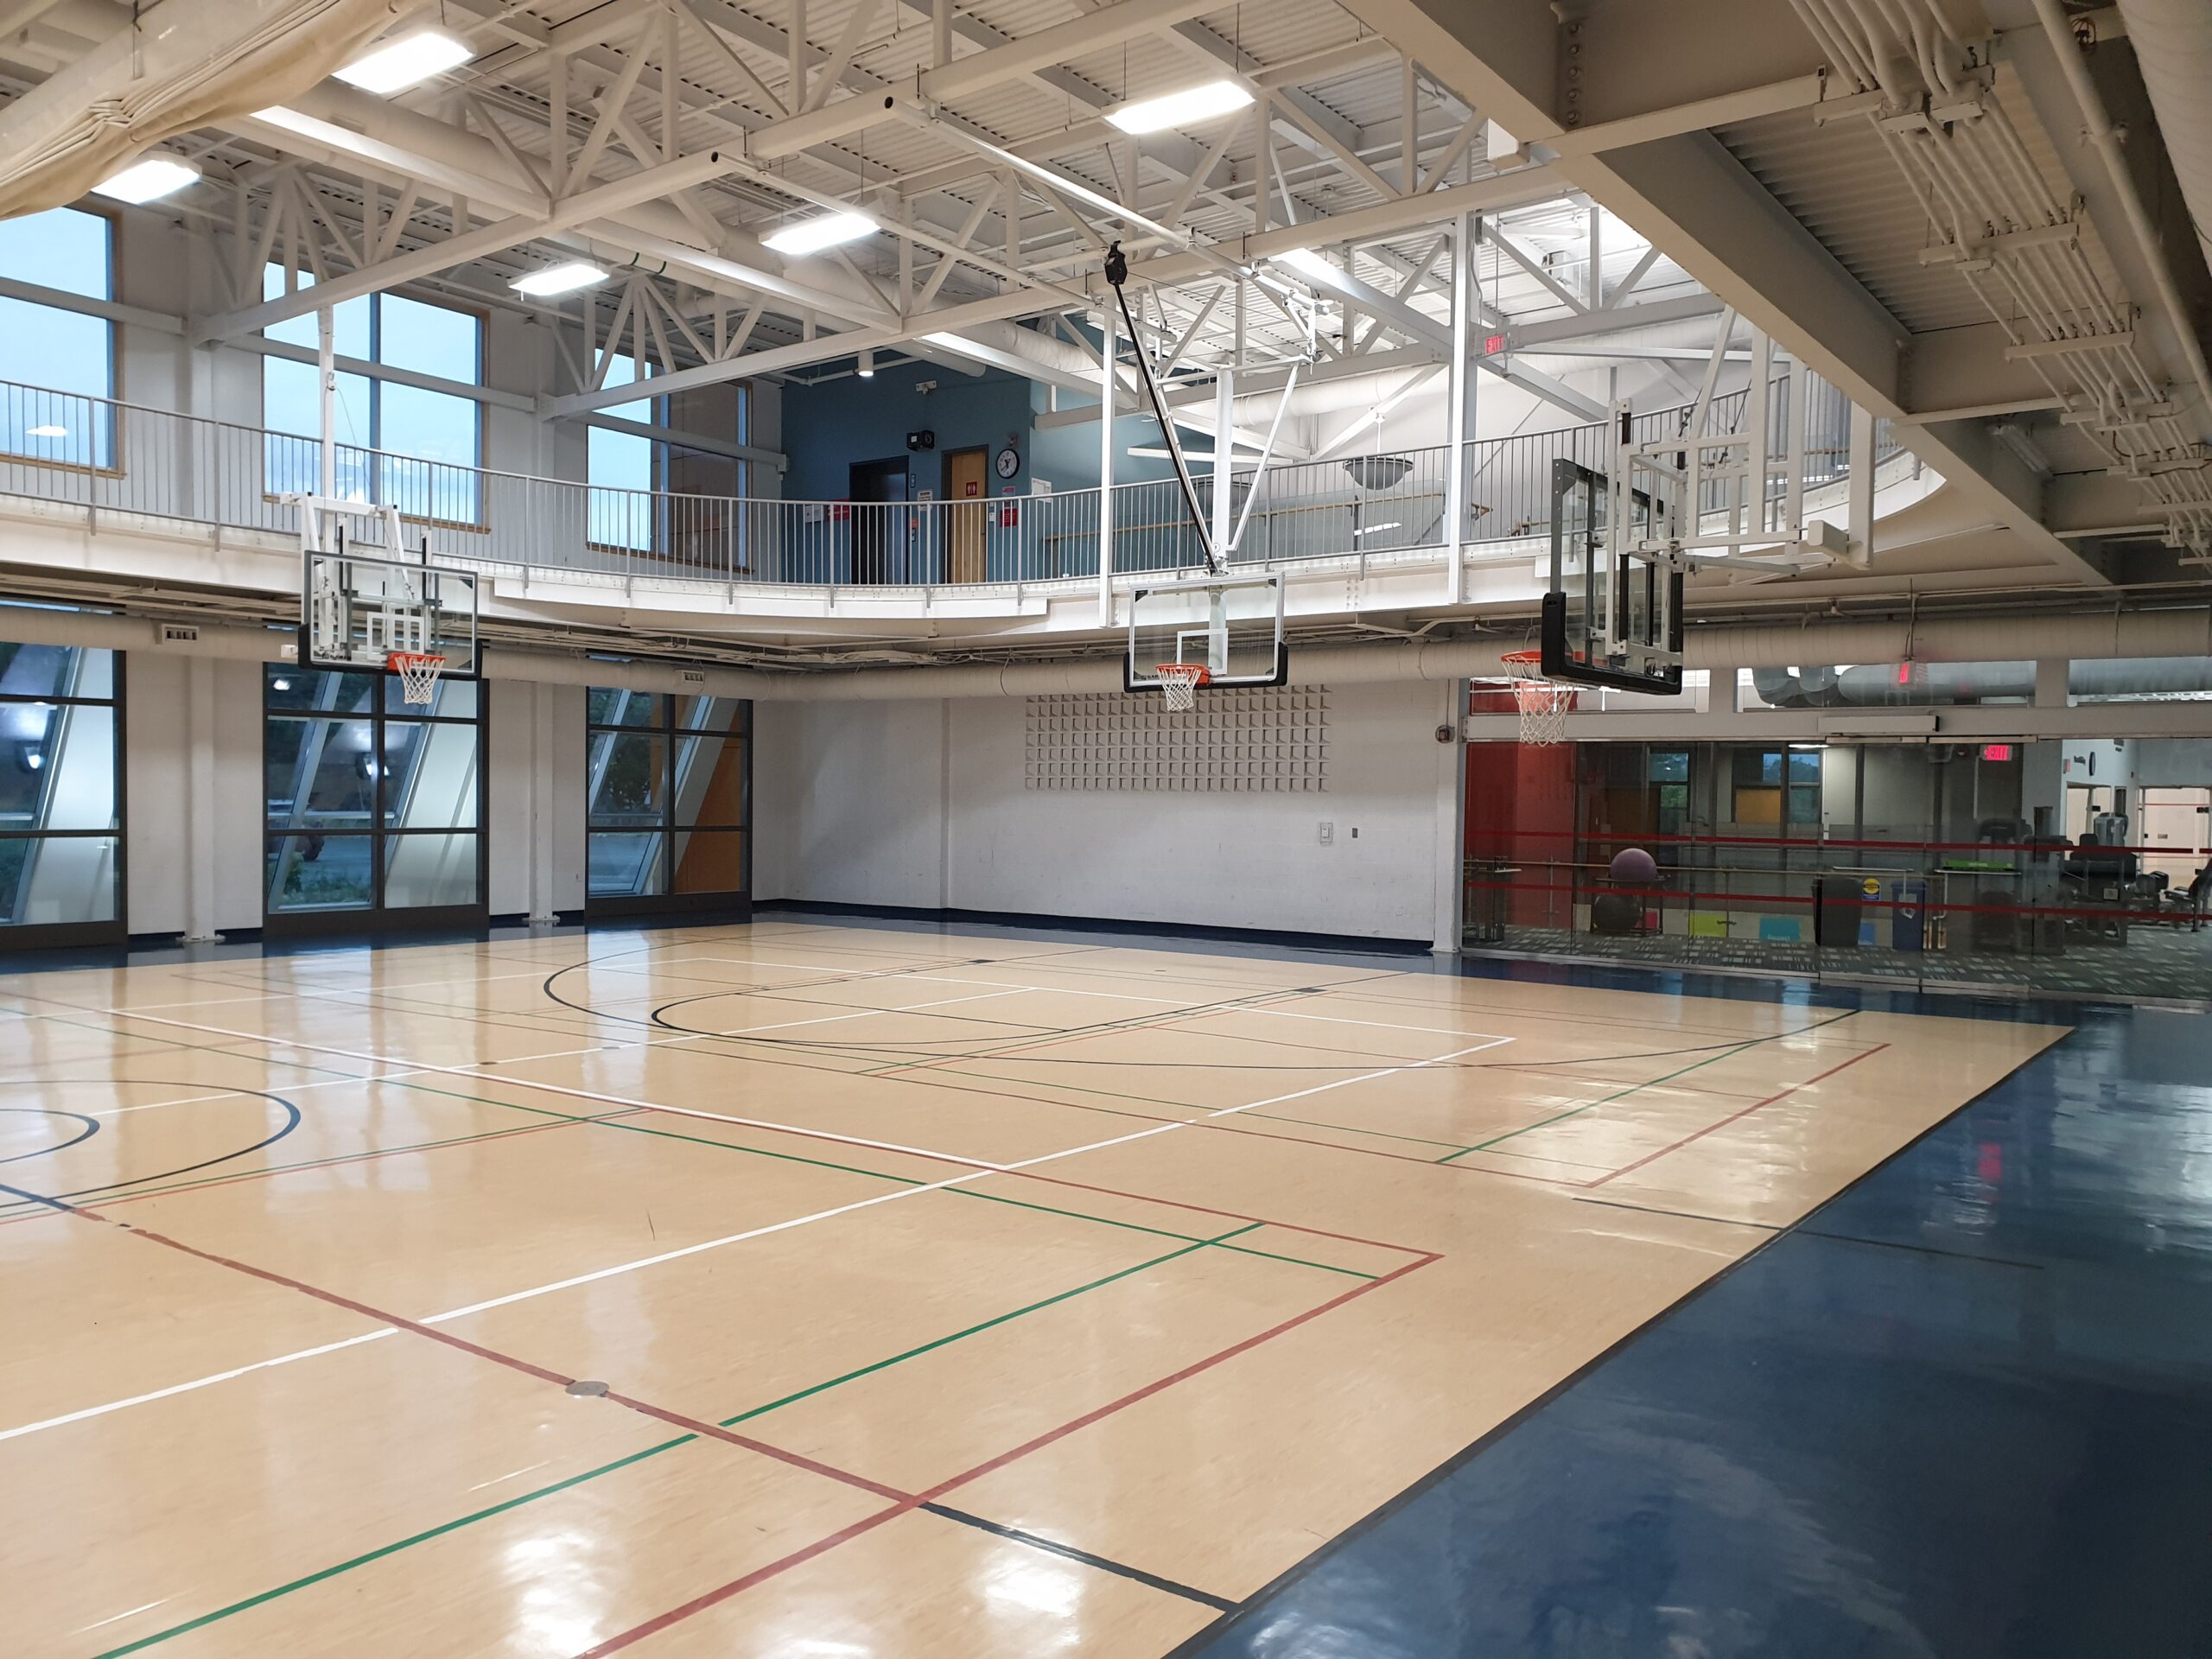 A gymnasium with basketball nets below the walking track